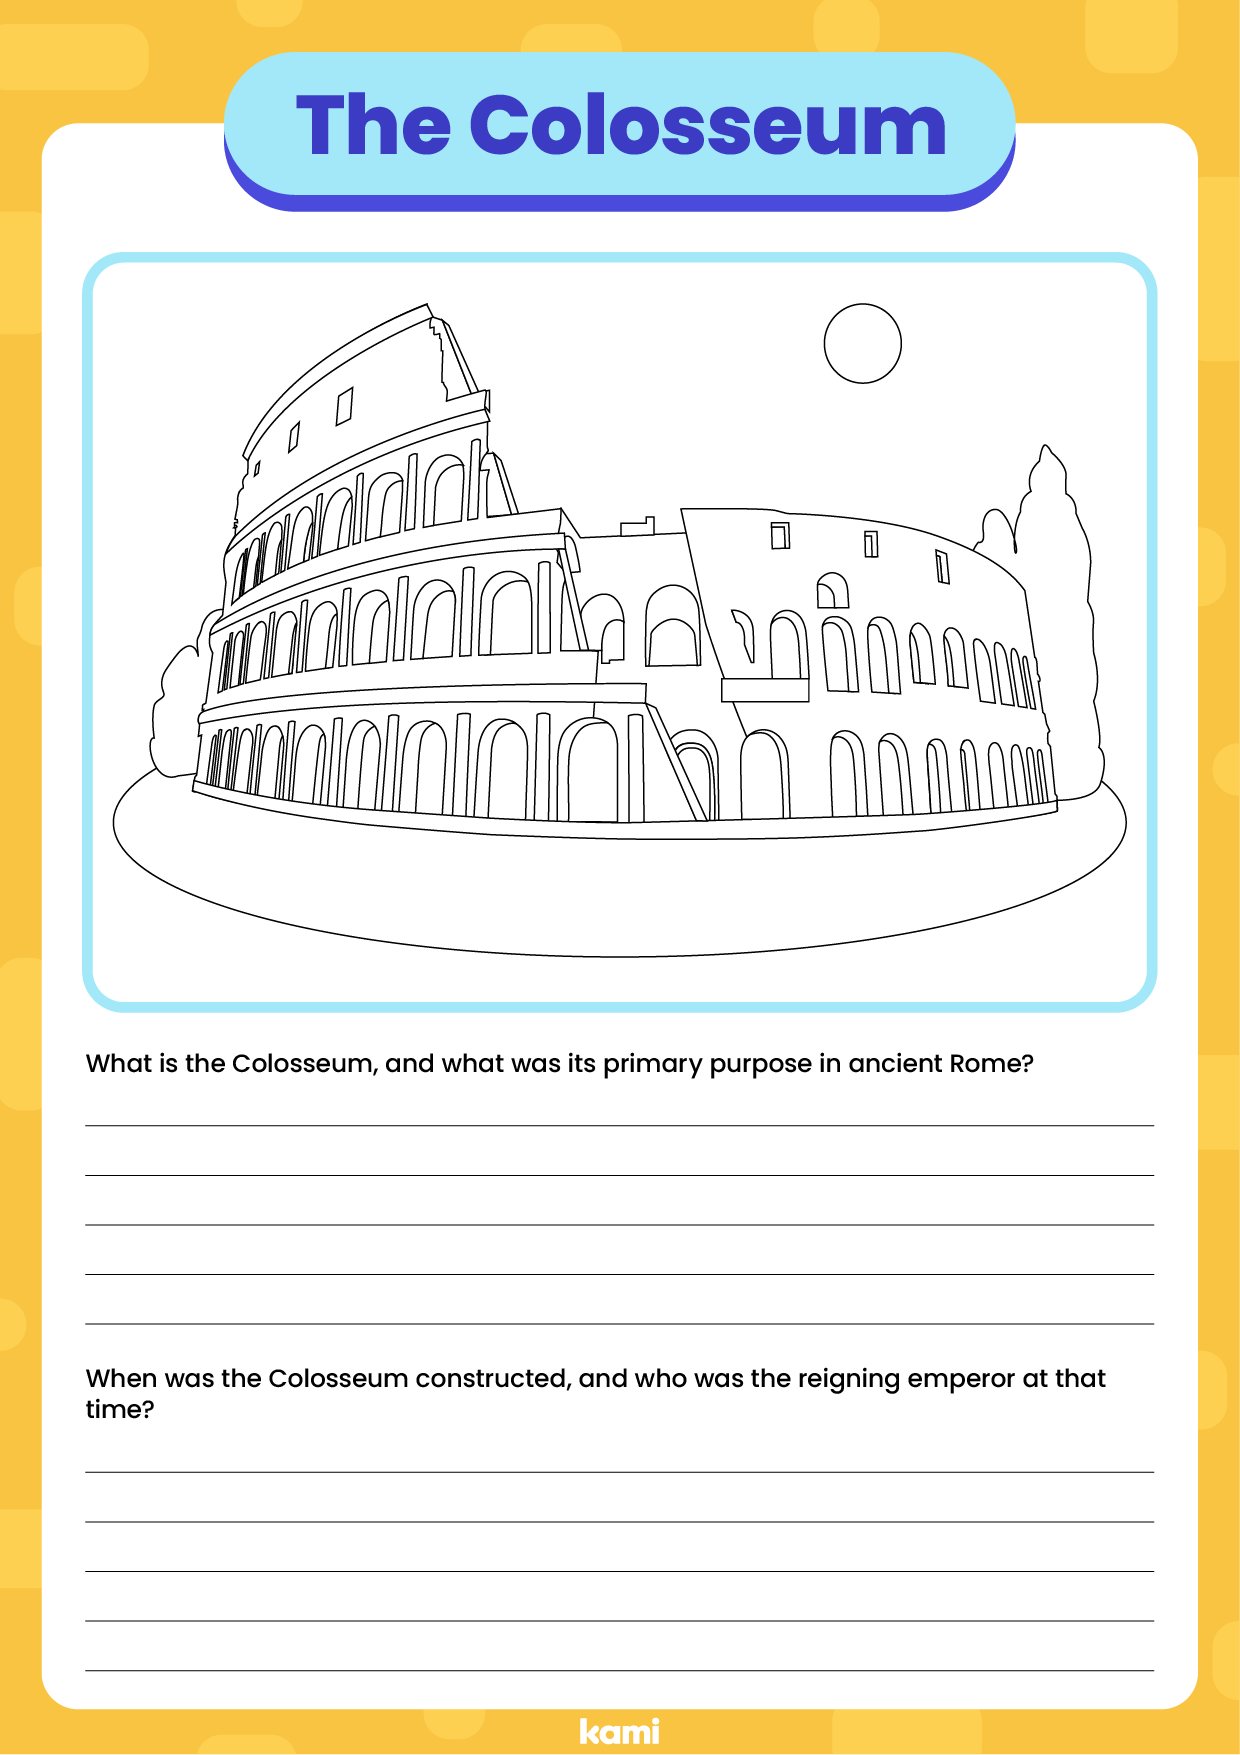 A worksheet for researching with a set of questions about the Colosseum